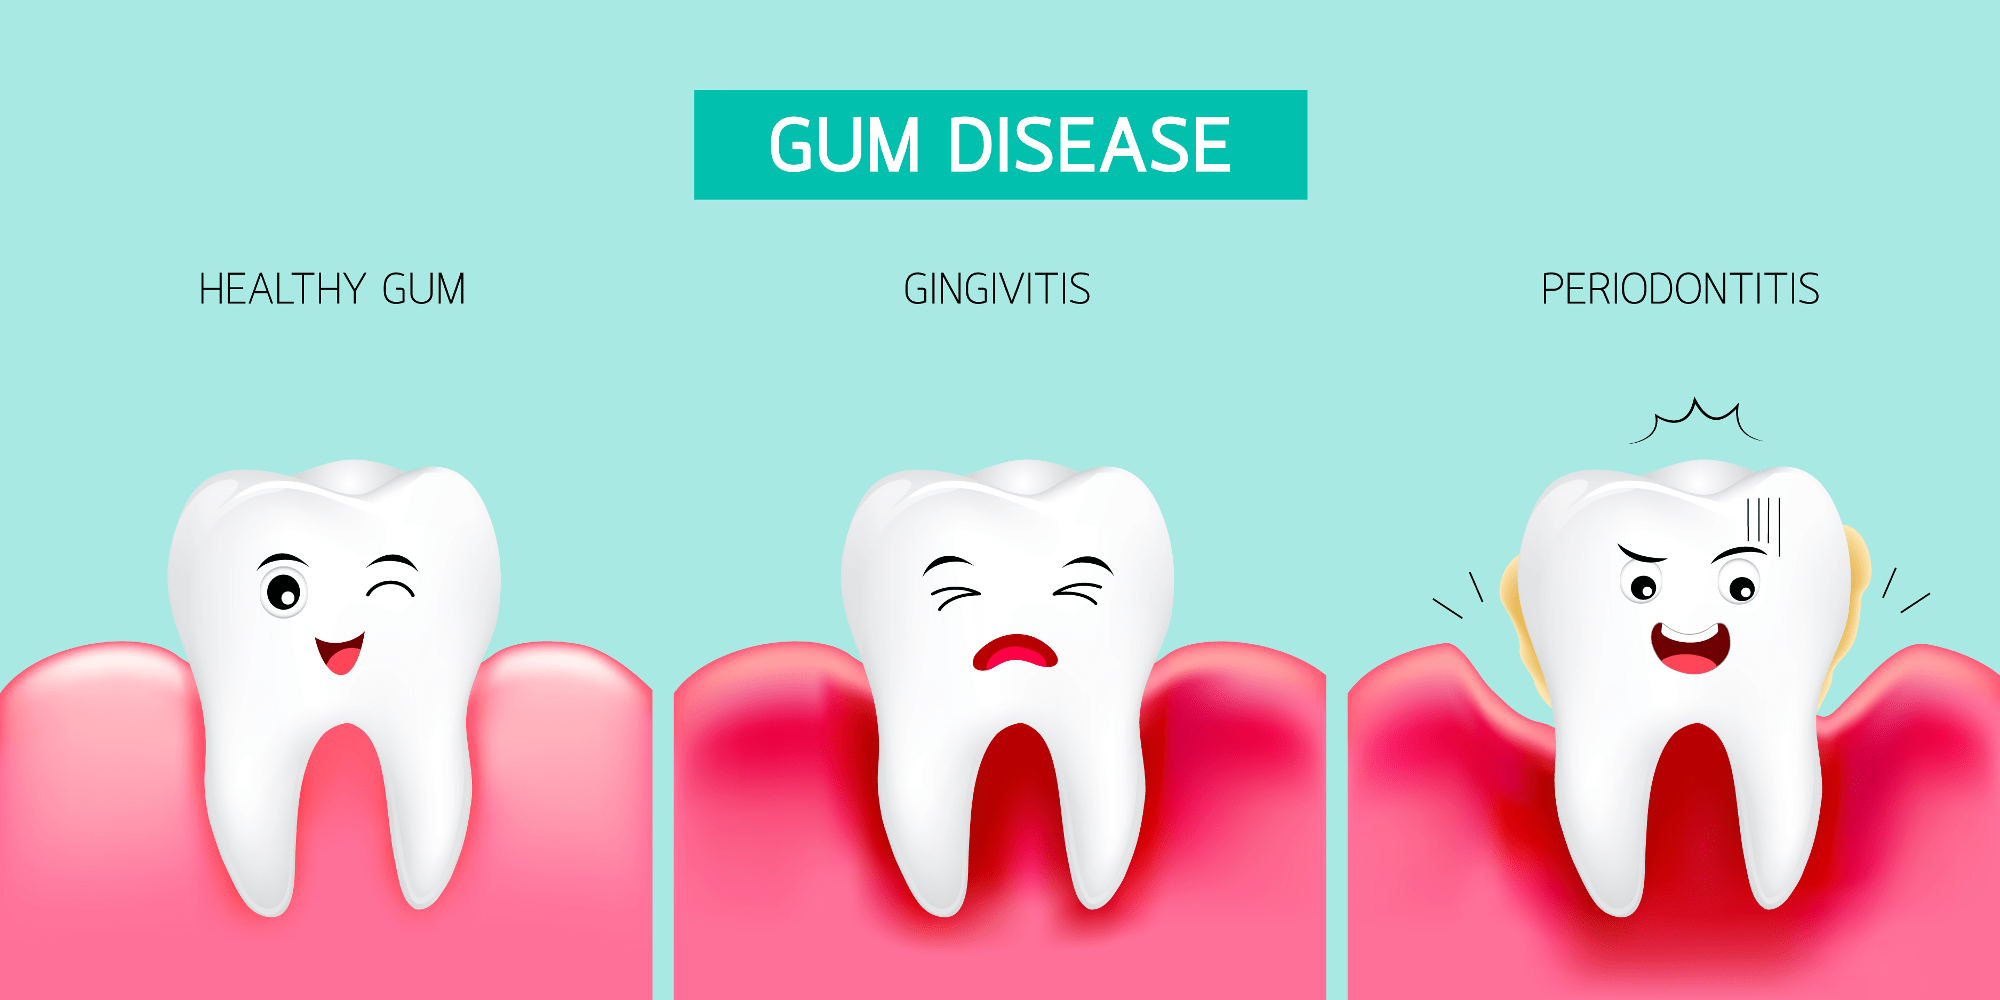 Signs of gingivitis easy to identify and prevent.